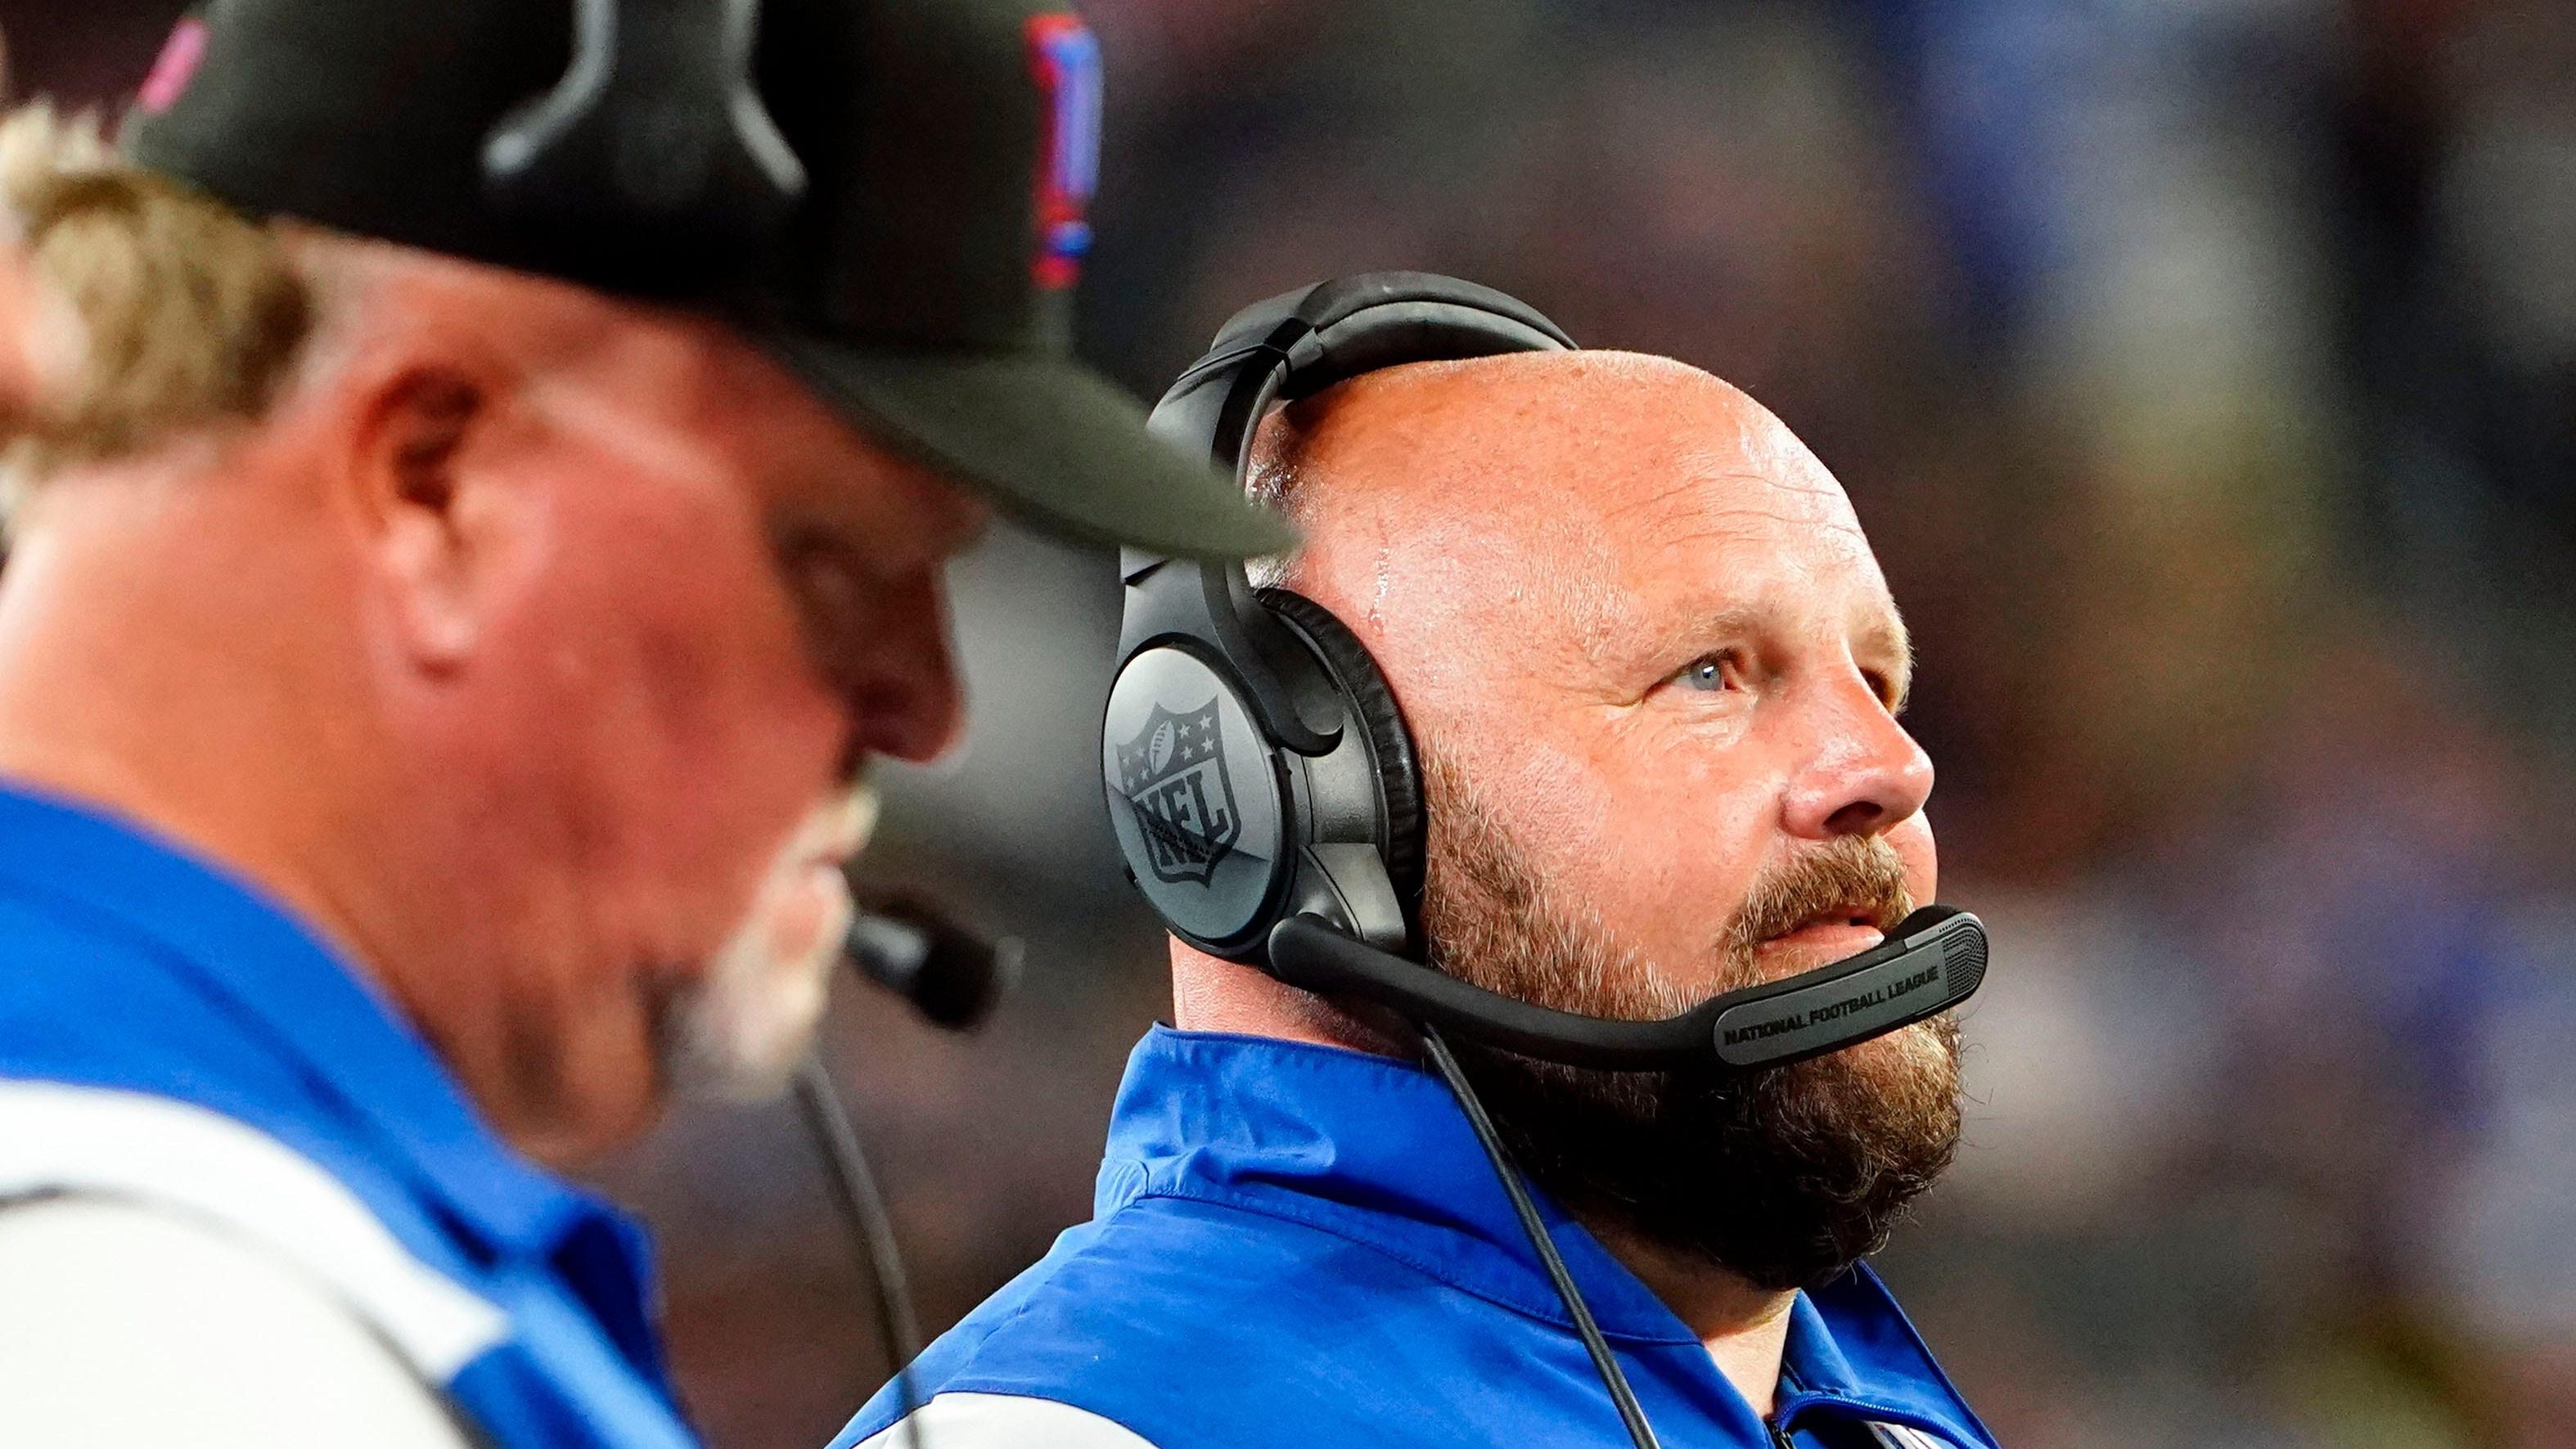 New York Giants head coach Brian Daboll, right, and defensive coordinator Don "Wink" Martindale on the sideline / Danielle Parhizkaran - NorthJersey.com - USA TODAY NETWORK